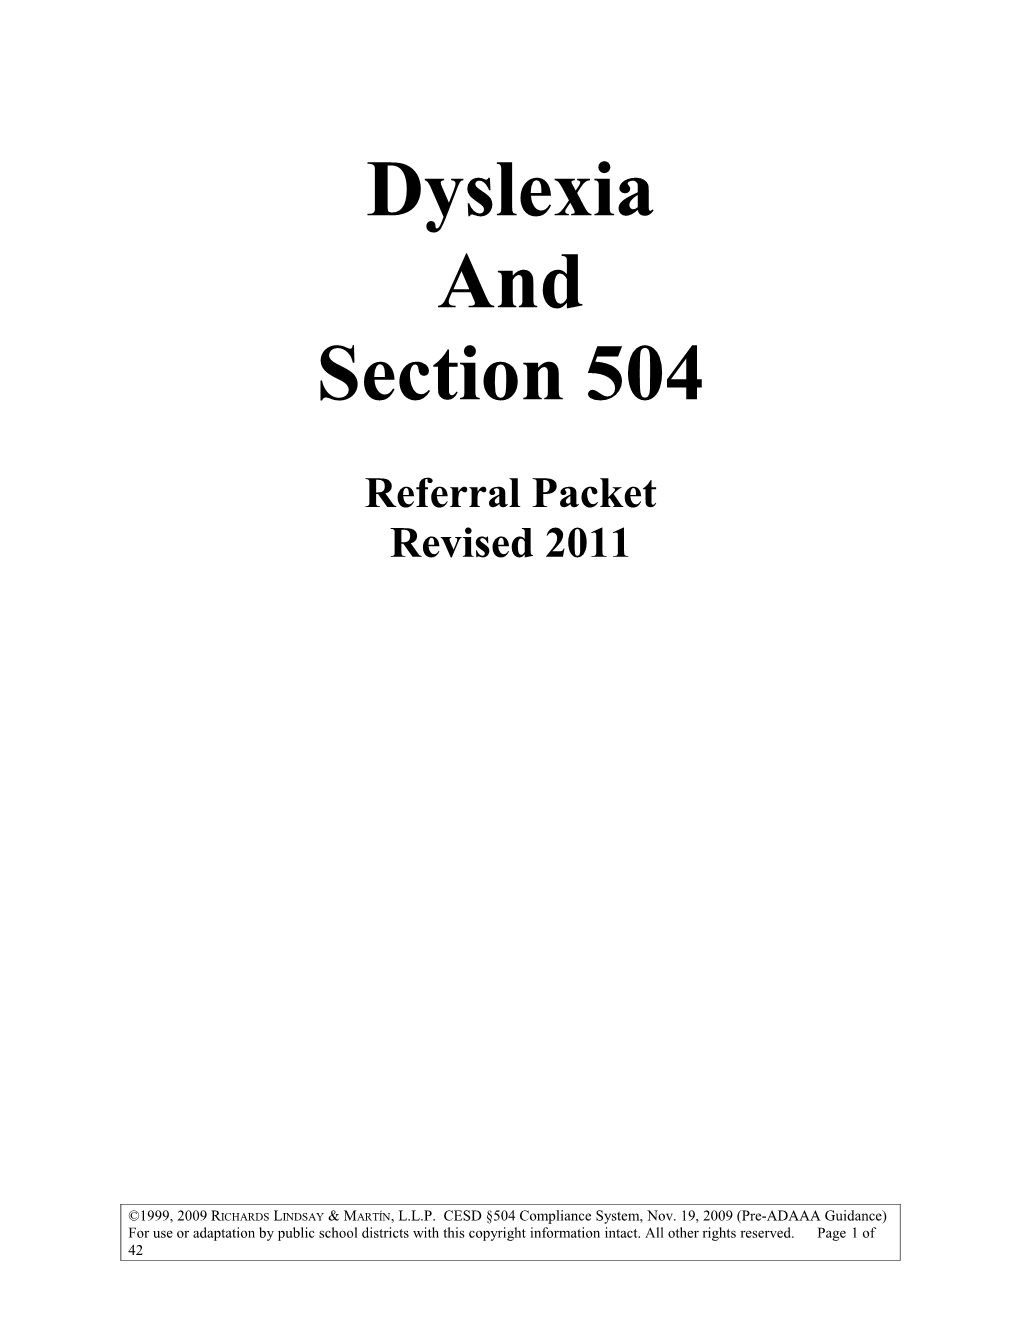 CESD Section 504 Compliance System